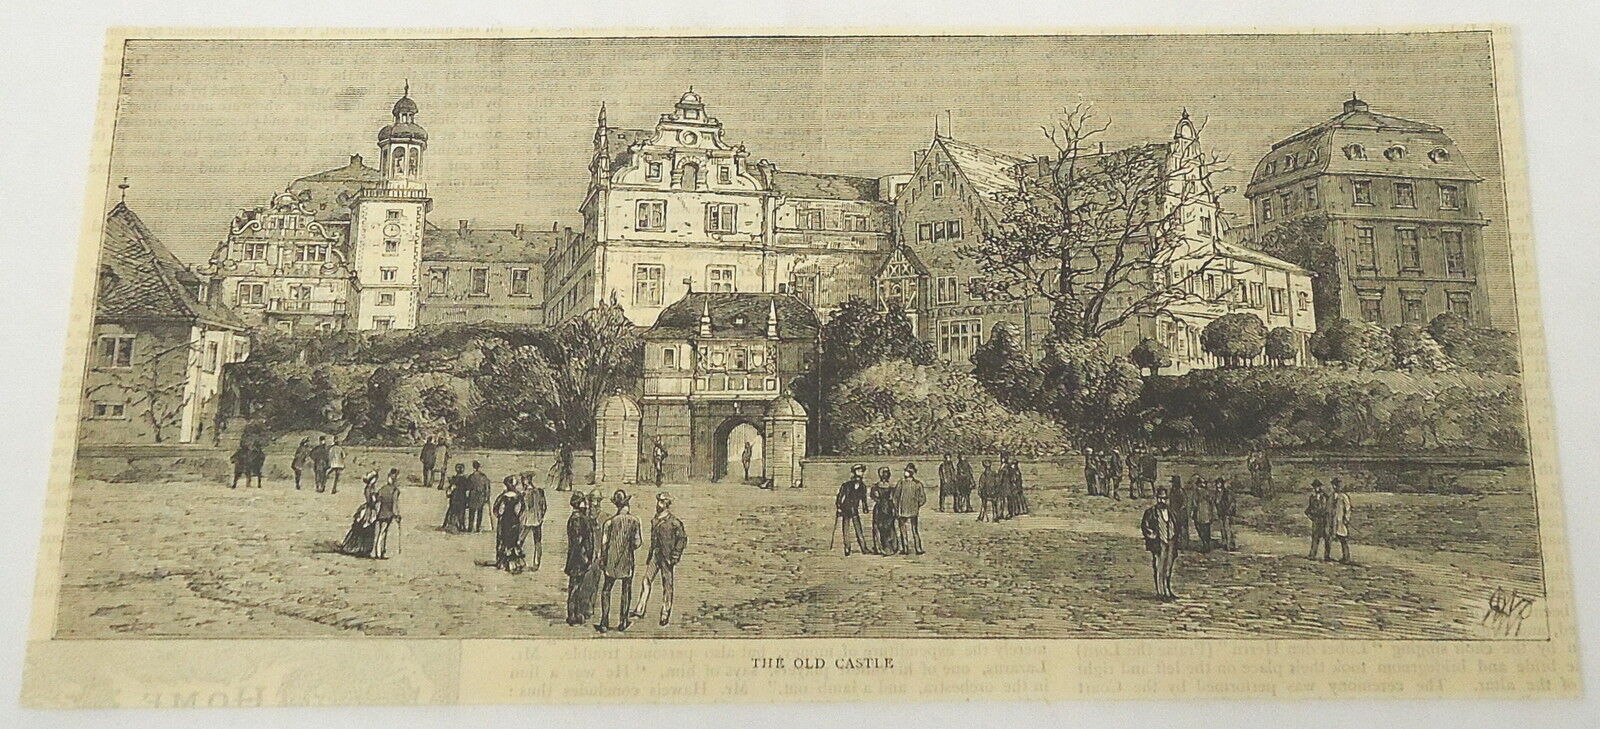 1884 magazine engraving ~ THE OLD CASTLE ~ Darmstadt Germany